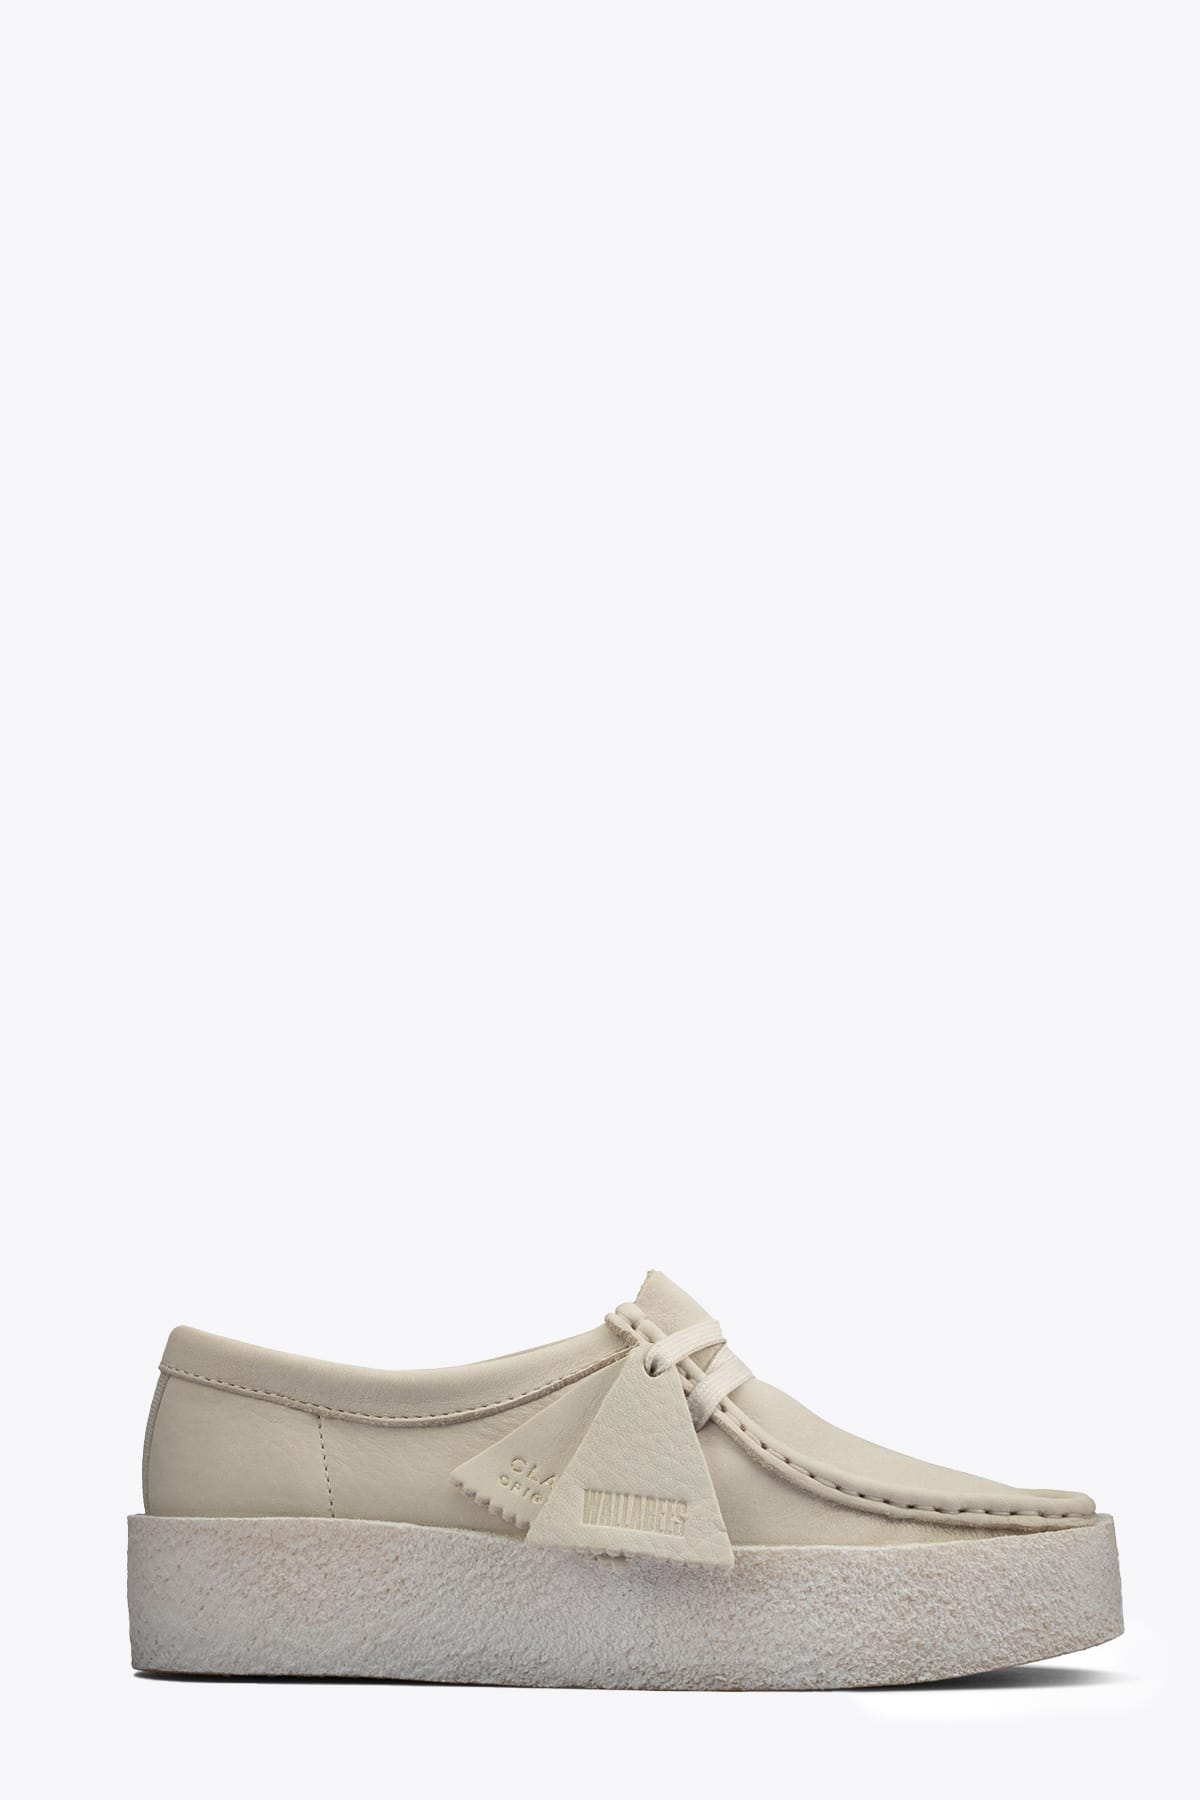 CLARKS BIANCO OFF-WHITE NUBUK LEATHER LOAFER - WALLABE CUP